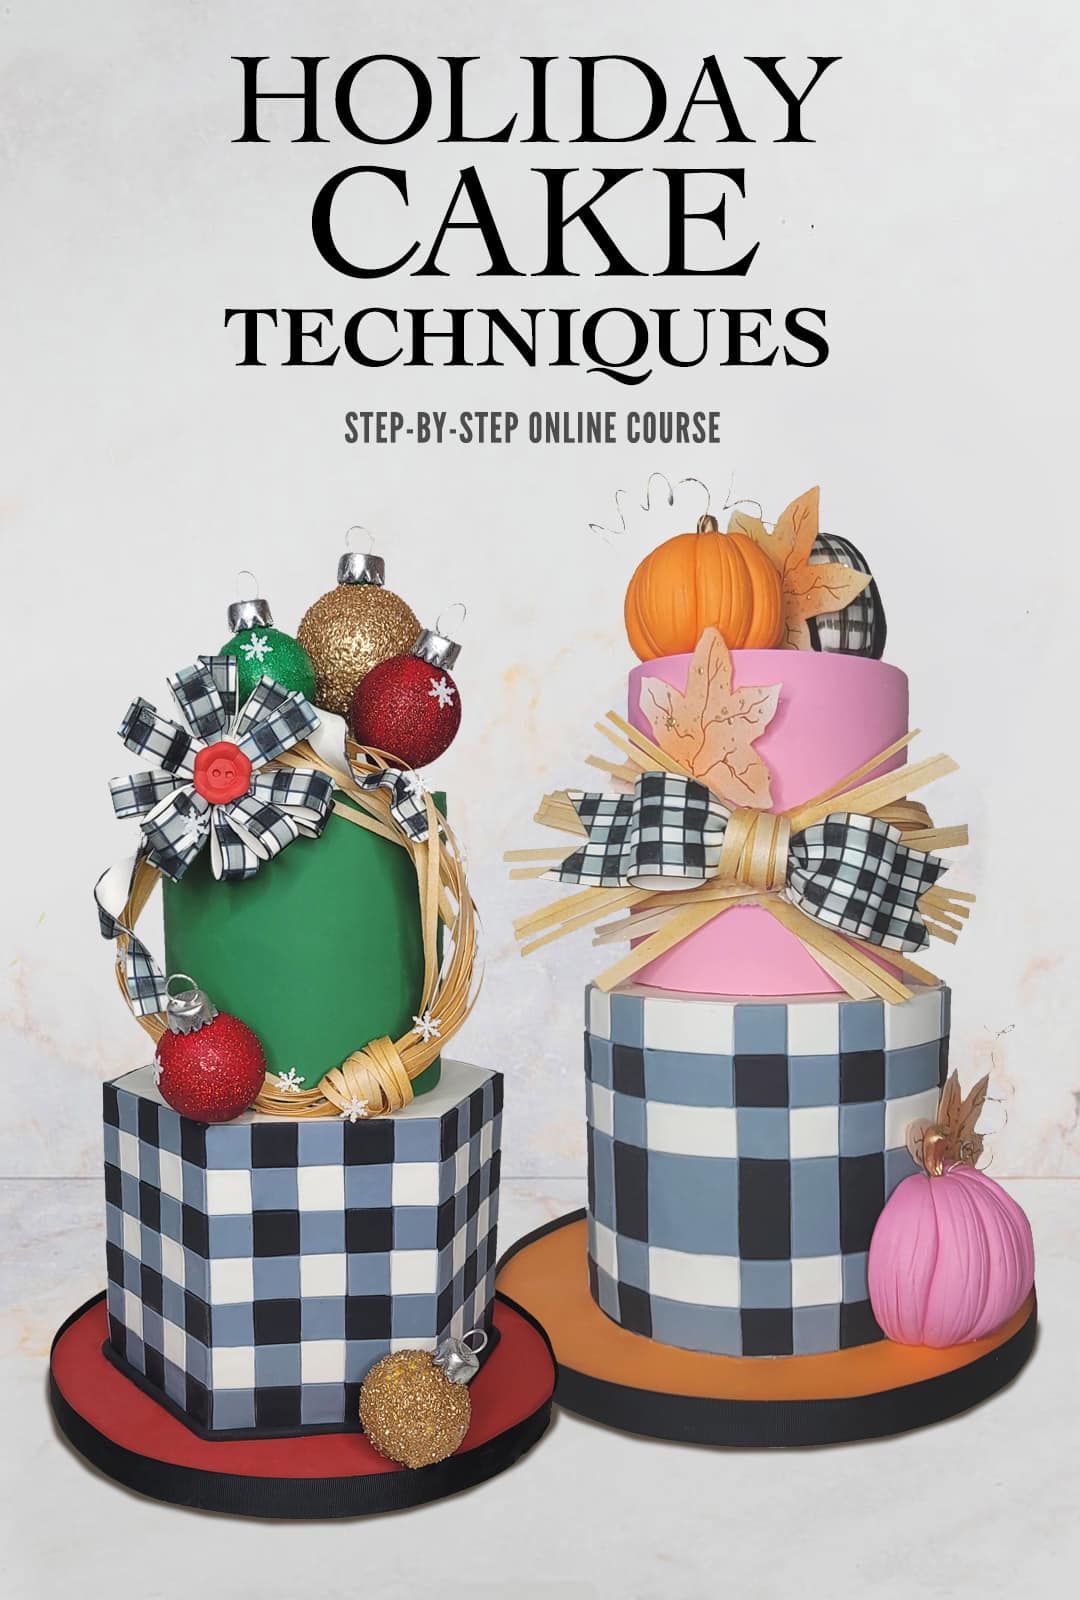 Poster of two cakes decorated for the holidays